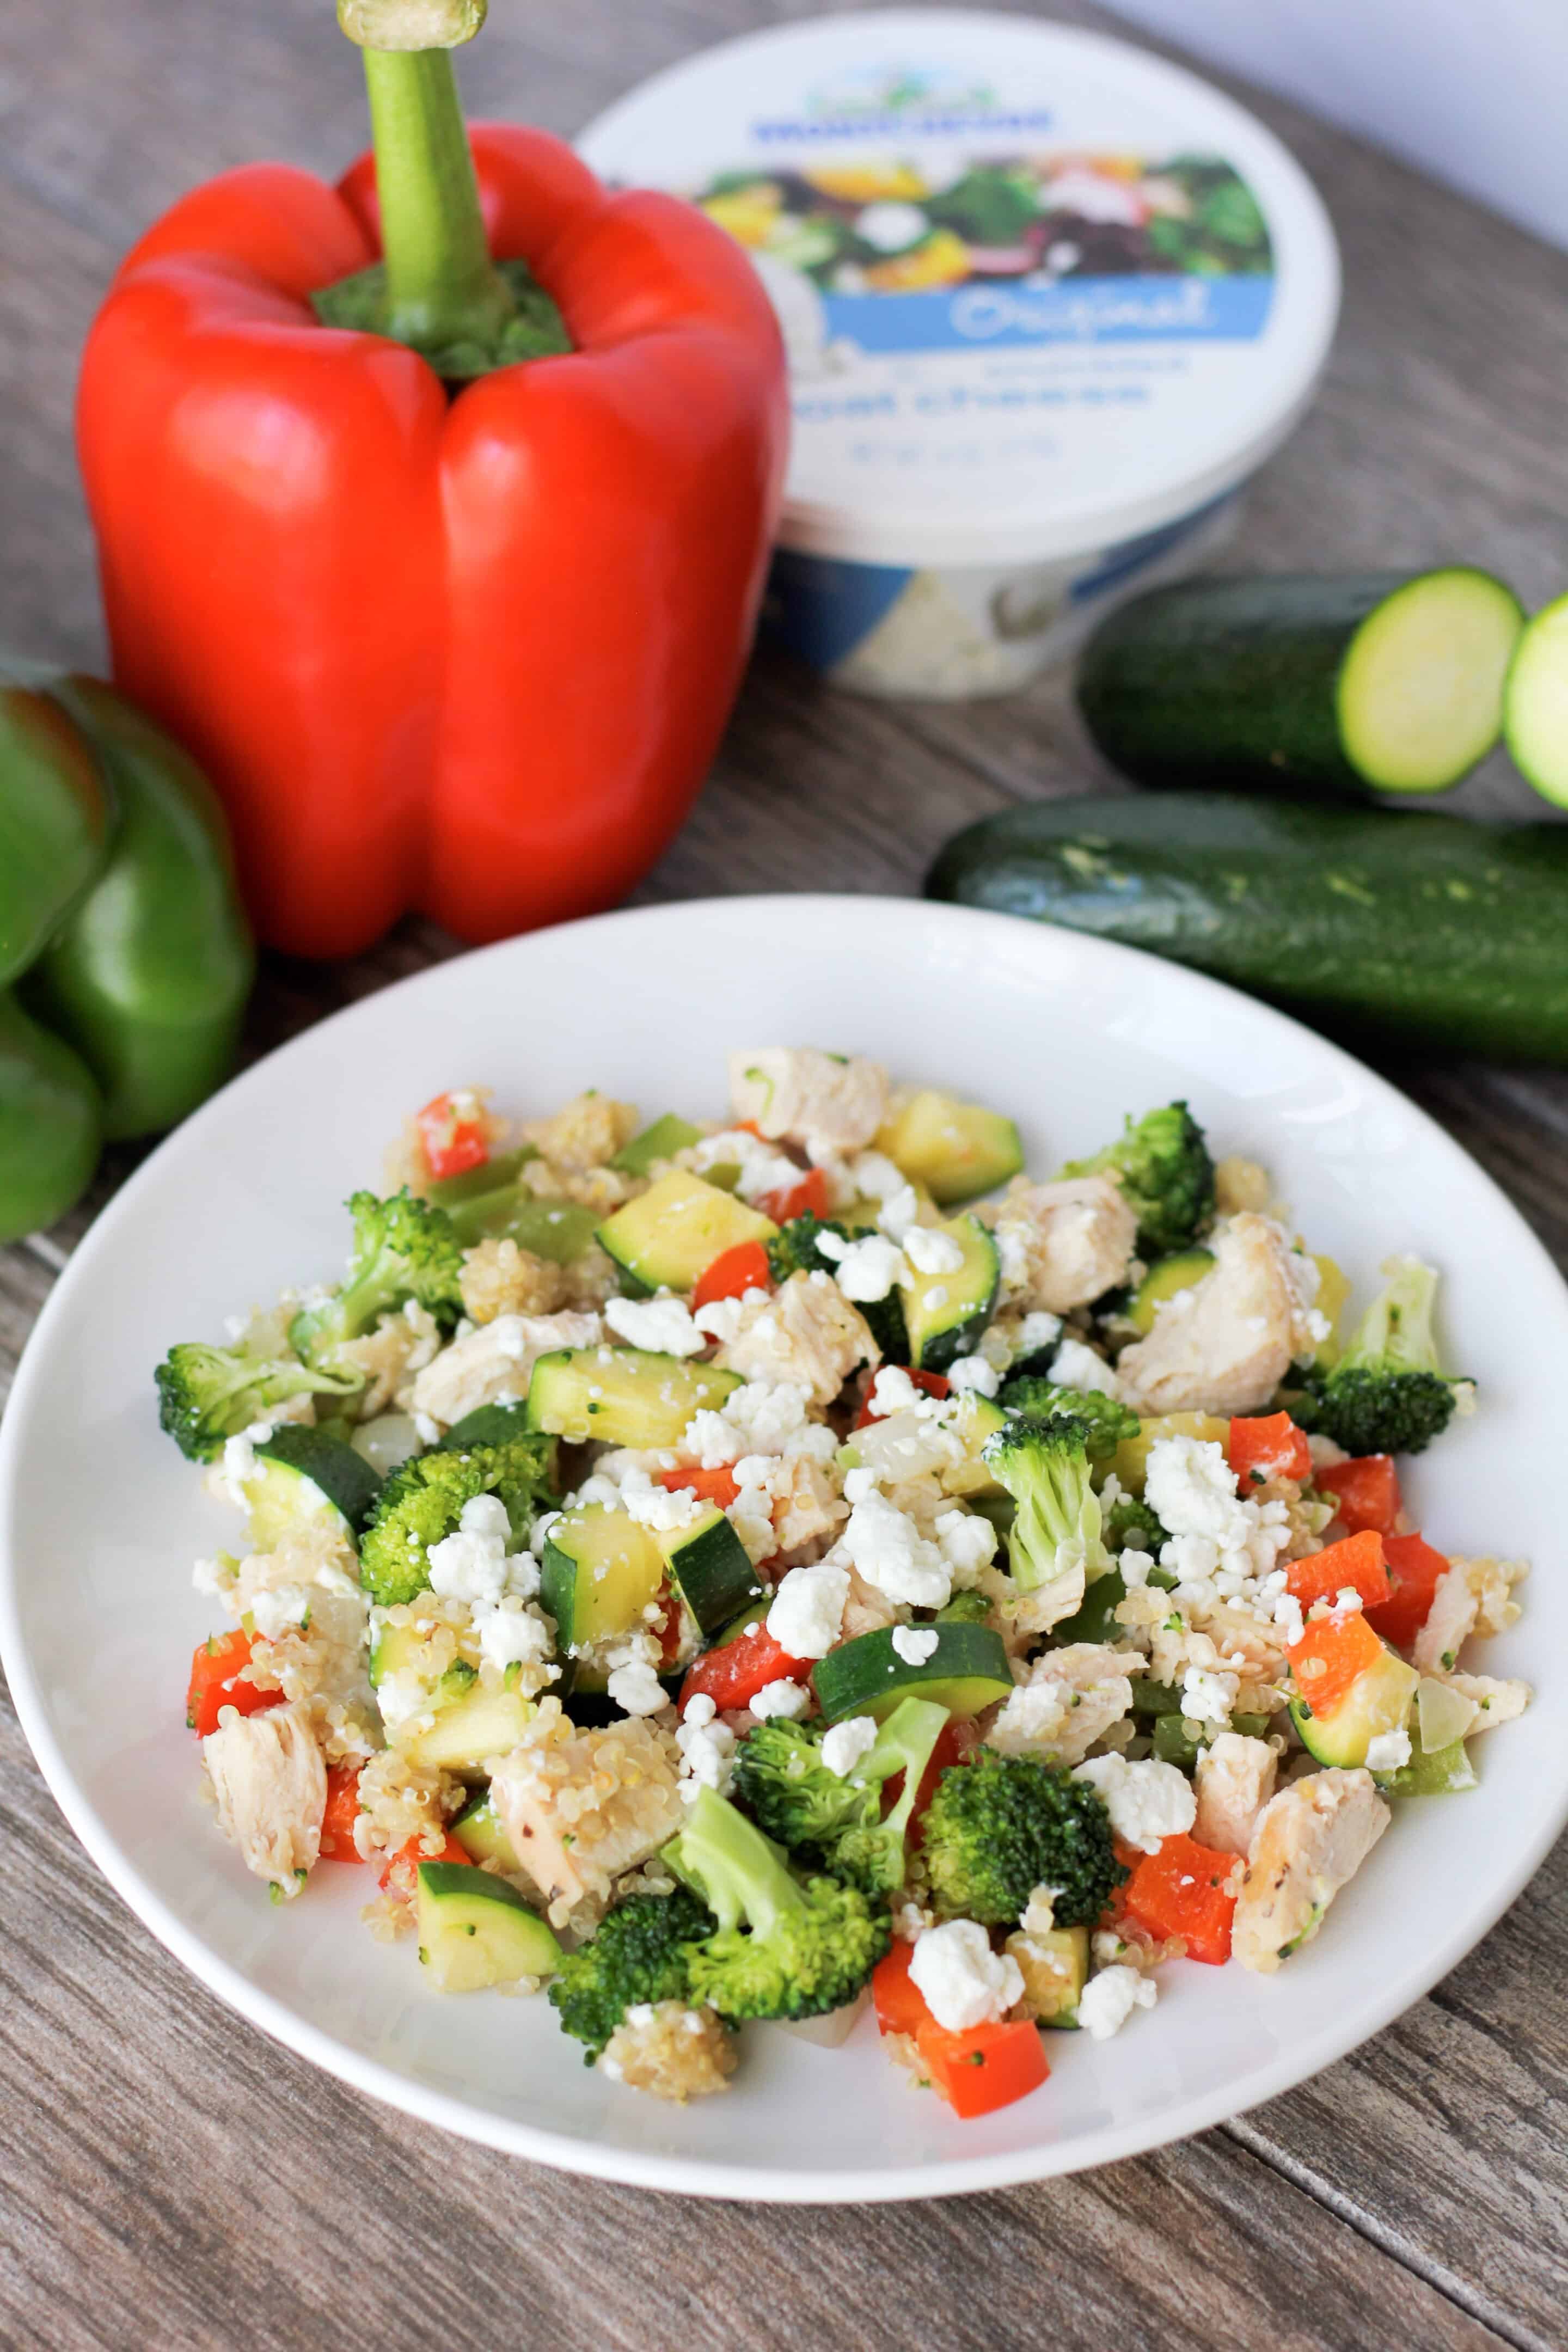 Quinoa Bowl with Grilled Chicken, Veggies, and Goat Cheese